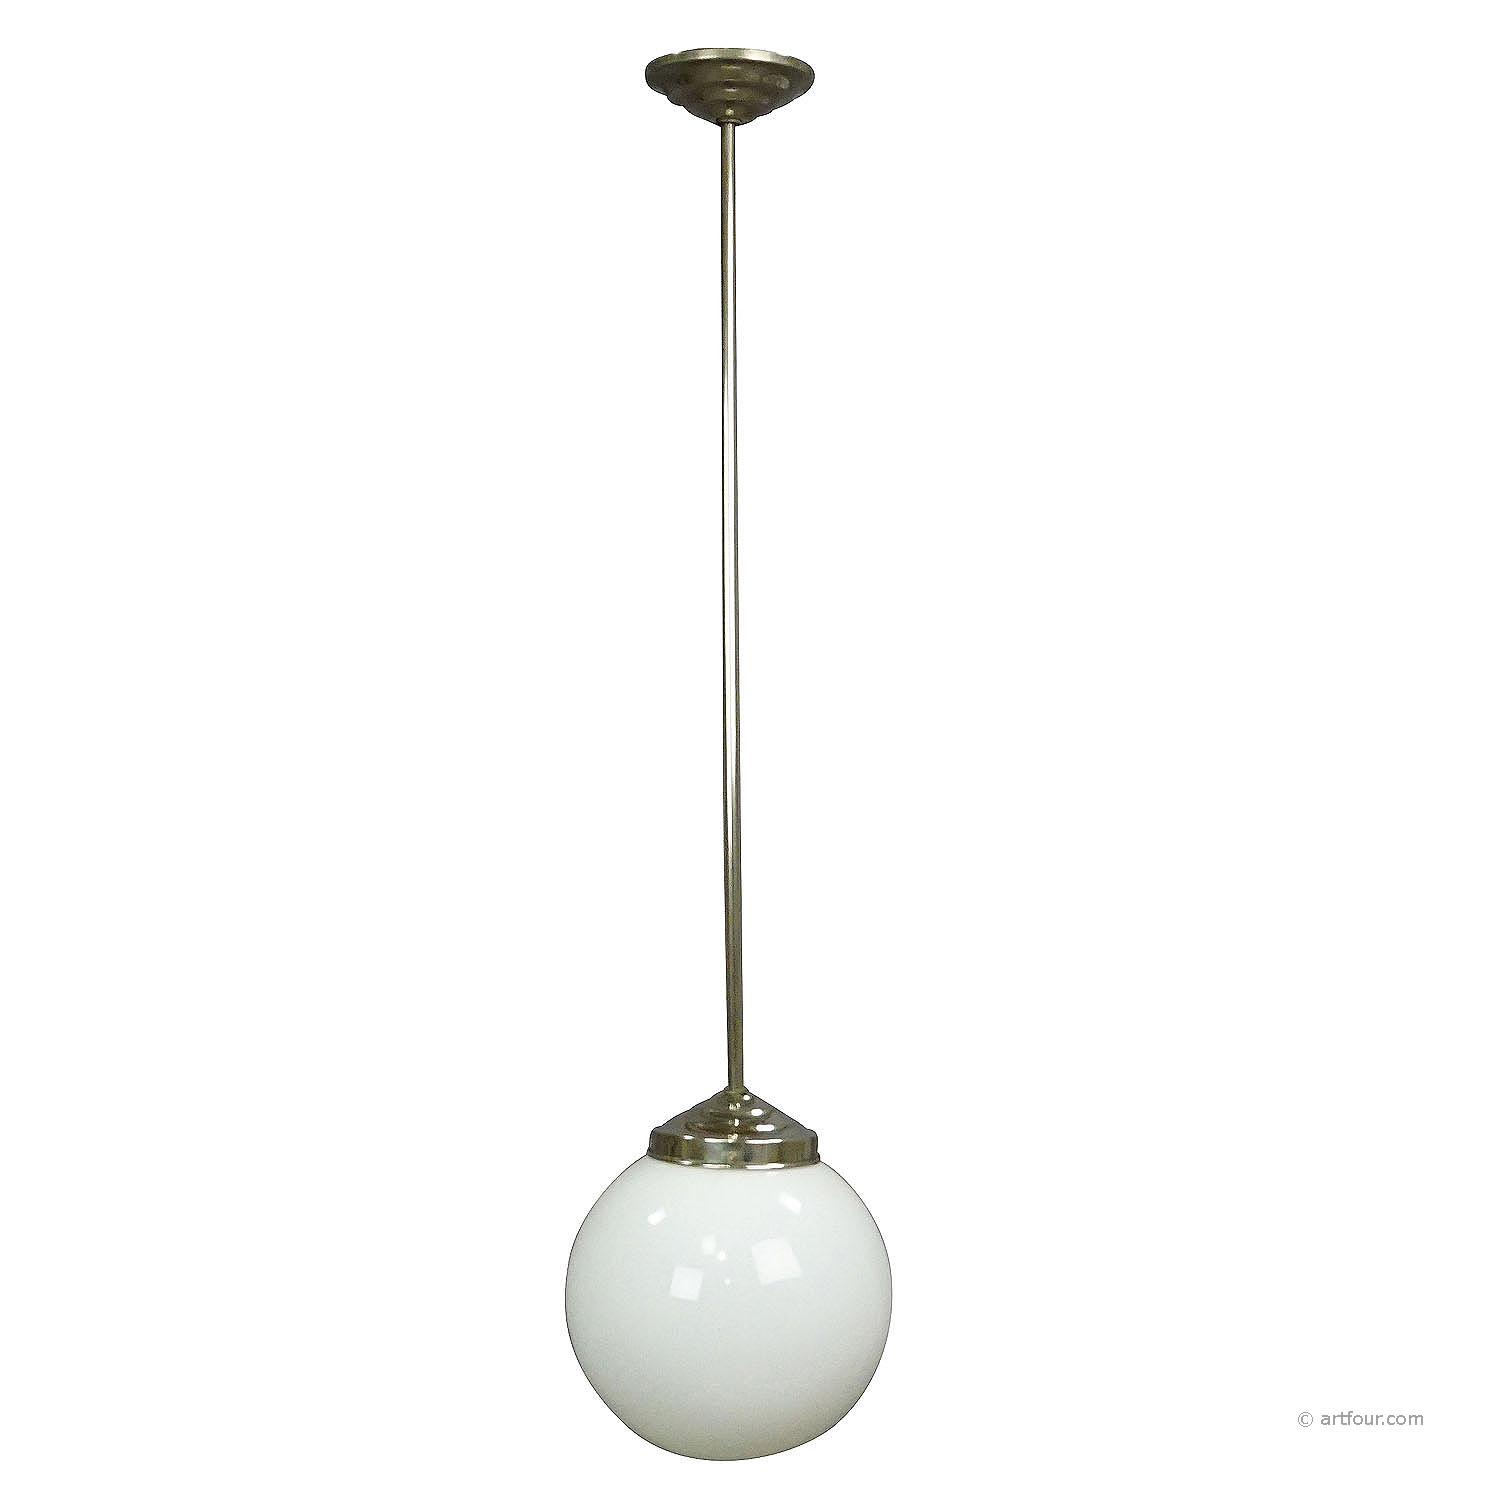 Functionalistic Bauhaus Style Pendant Light with Opaline Glass Shade